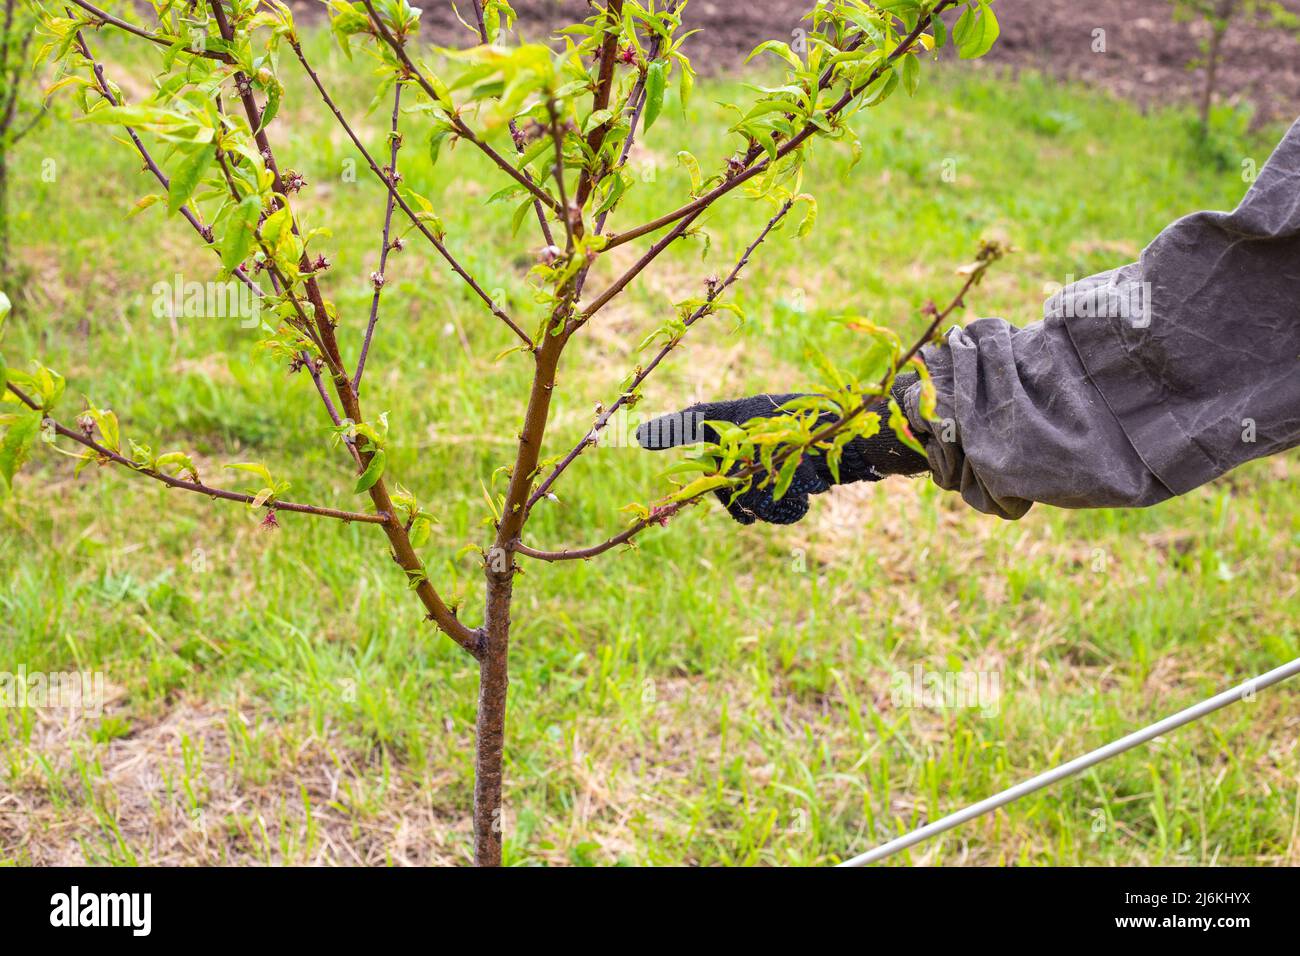 A farmer points a finger at a diseased plant, spraying young fruit trees from parasites and diseases. Garden care. Stock Photo